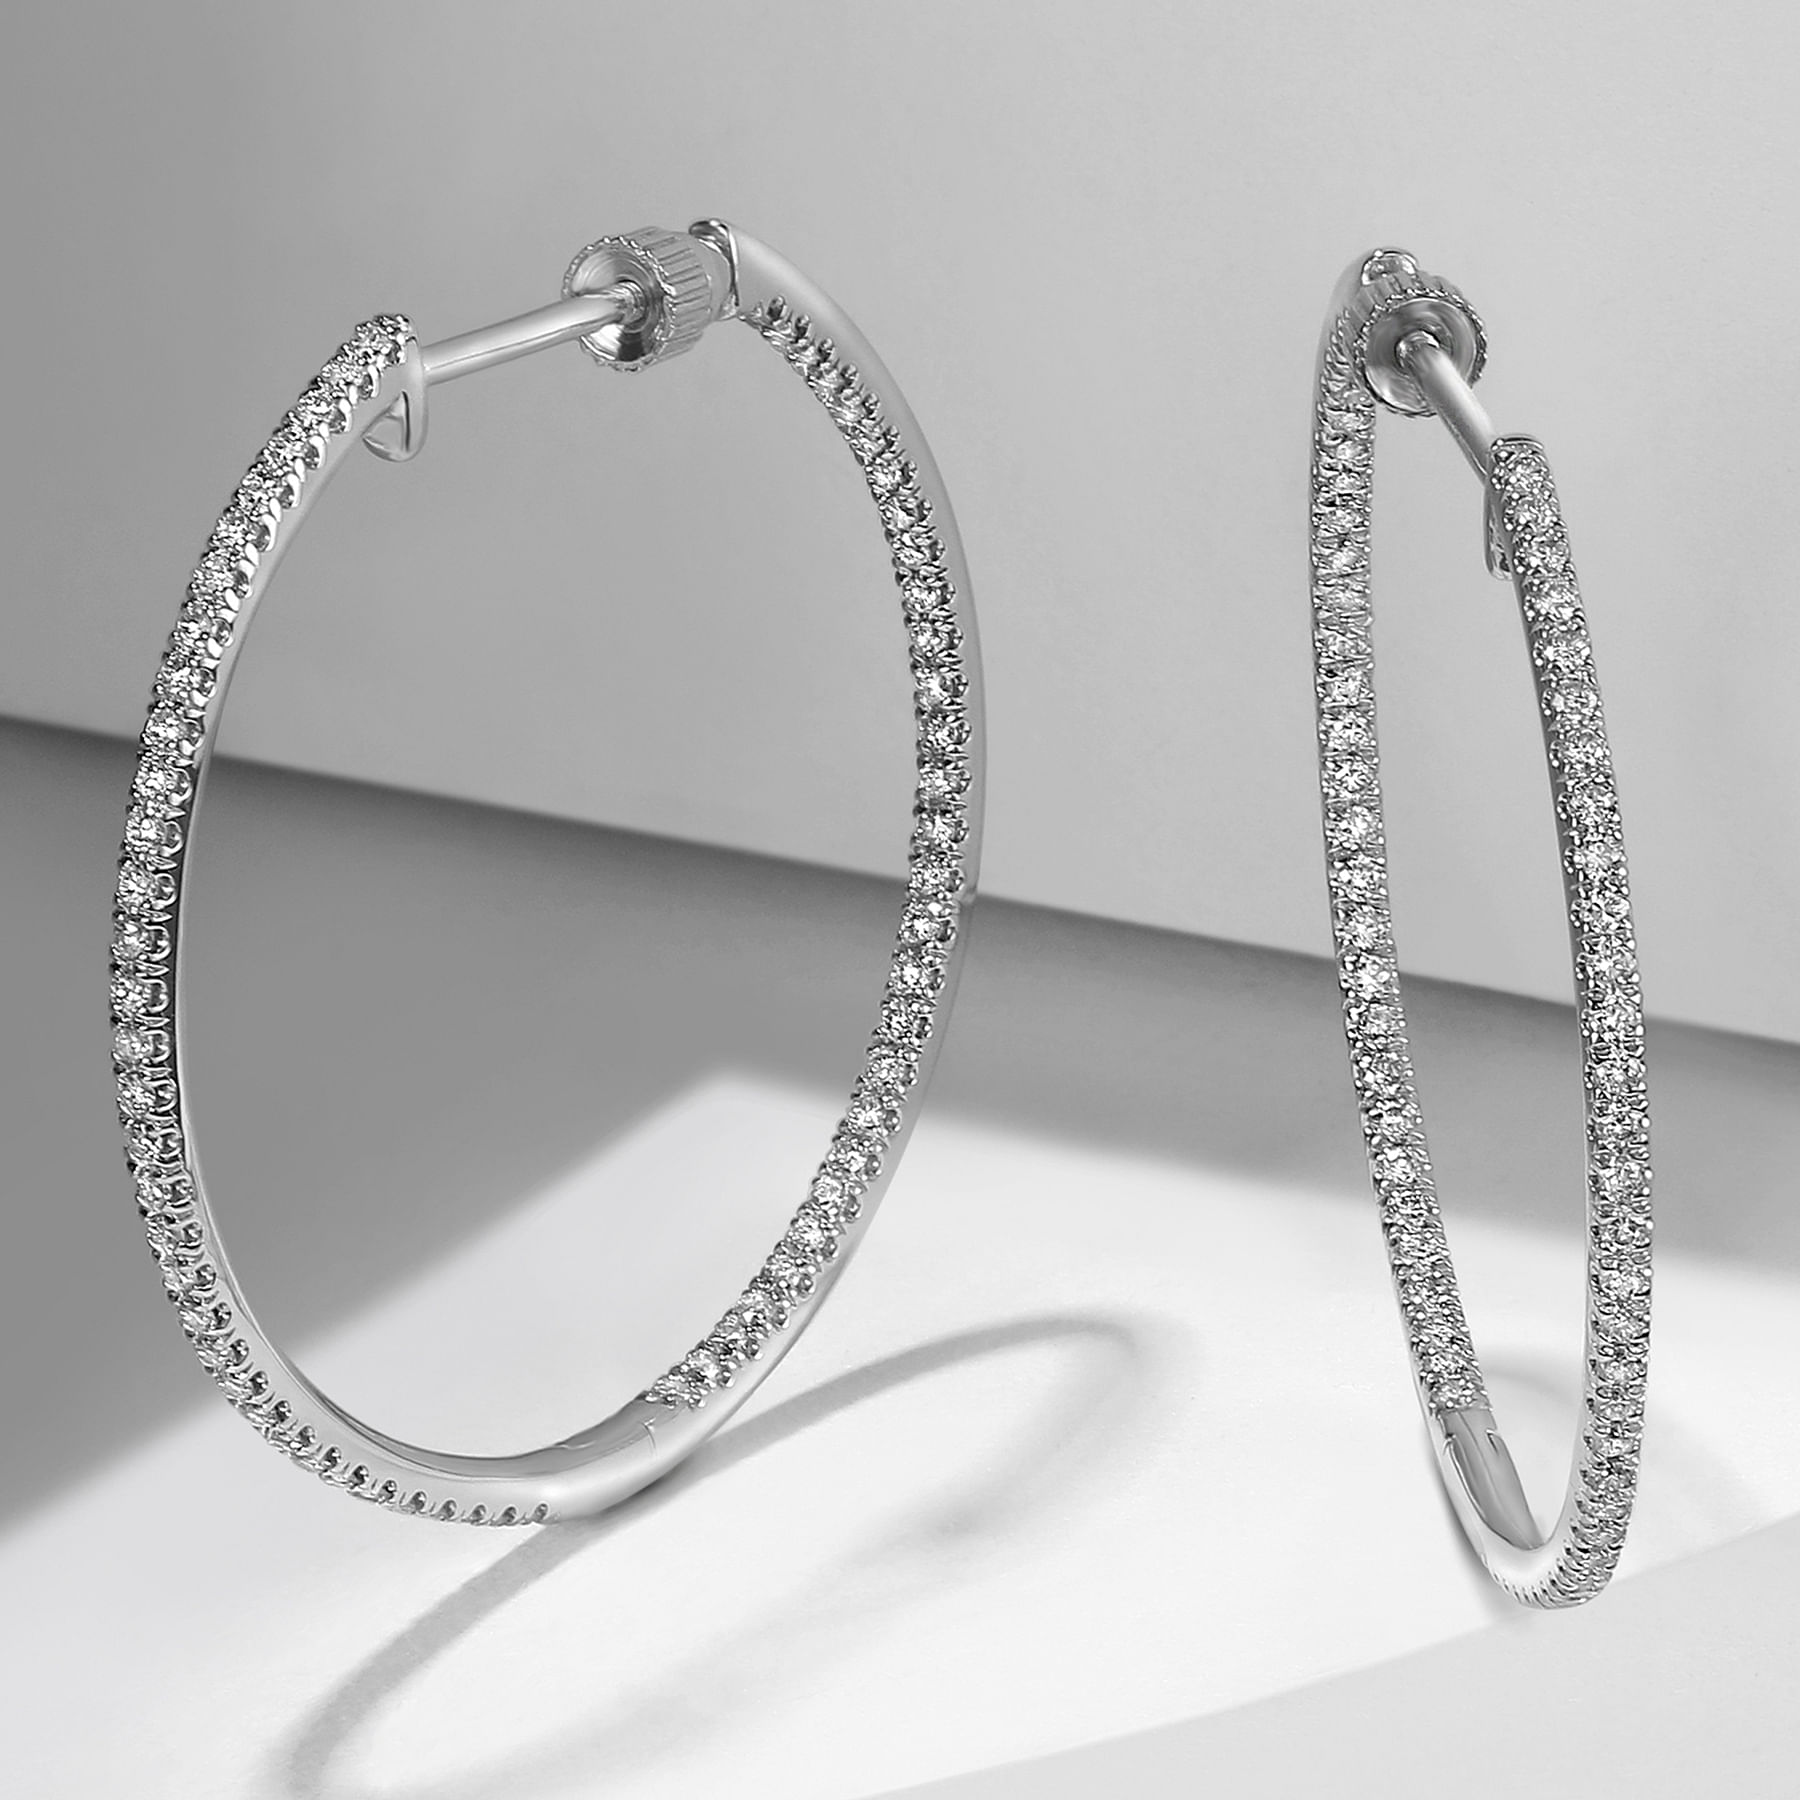 14K White Gold French Pavé 30mm Round Inside Out Diamond Hoop Earrings